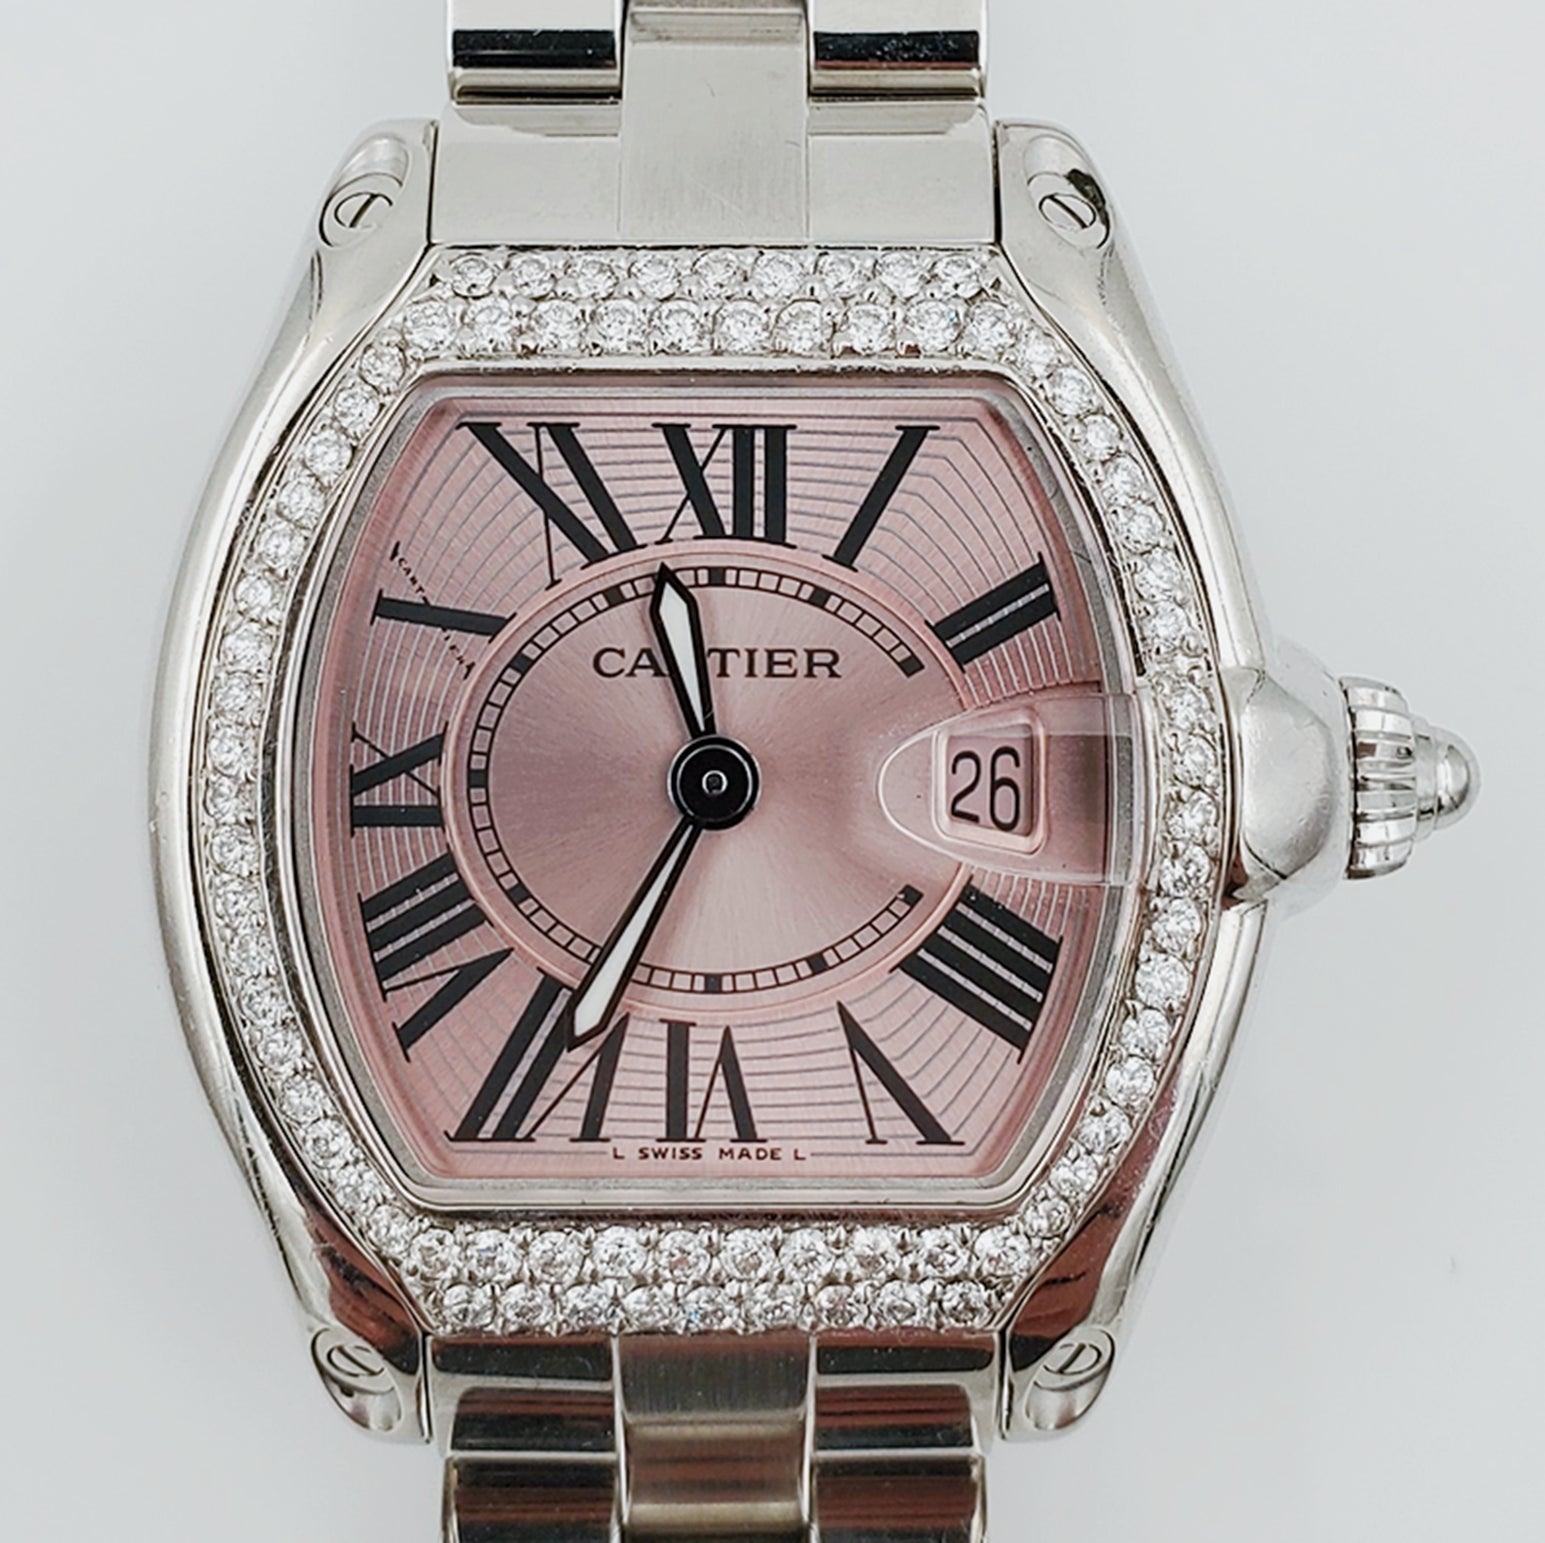 Ladies Medium Roadster Cartier Stainless Steel Roadster Watch with Diamond Bezel. (Pre-Owned W62016V3)